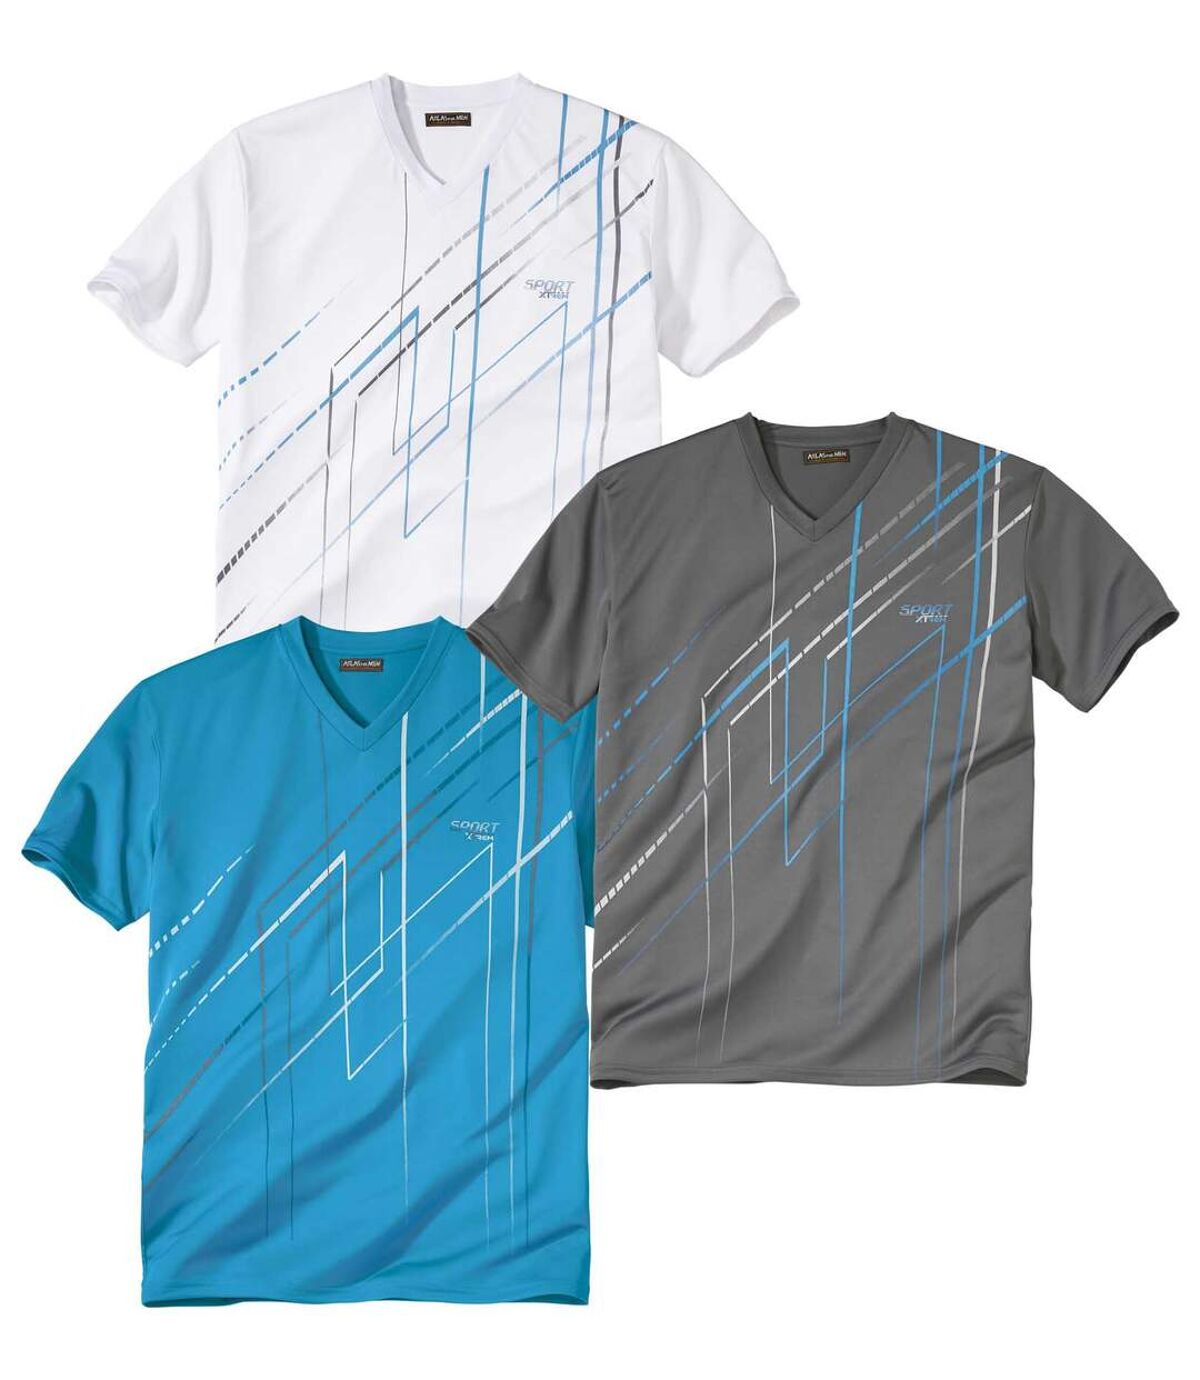 Pack of 3 Men's Sports Print T-Shirts - Grey Turquoise White Atlas For Men